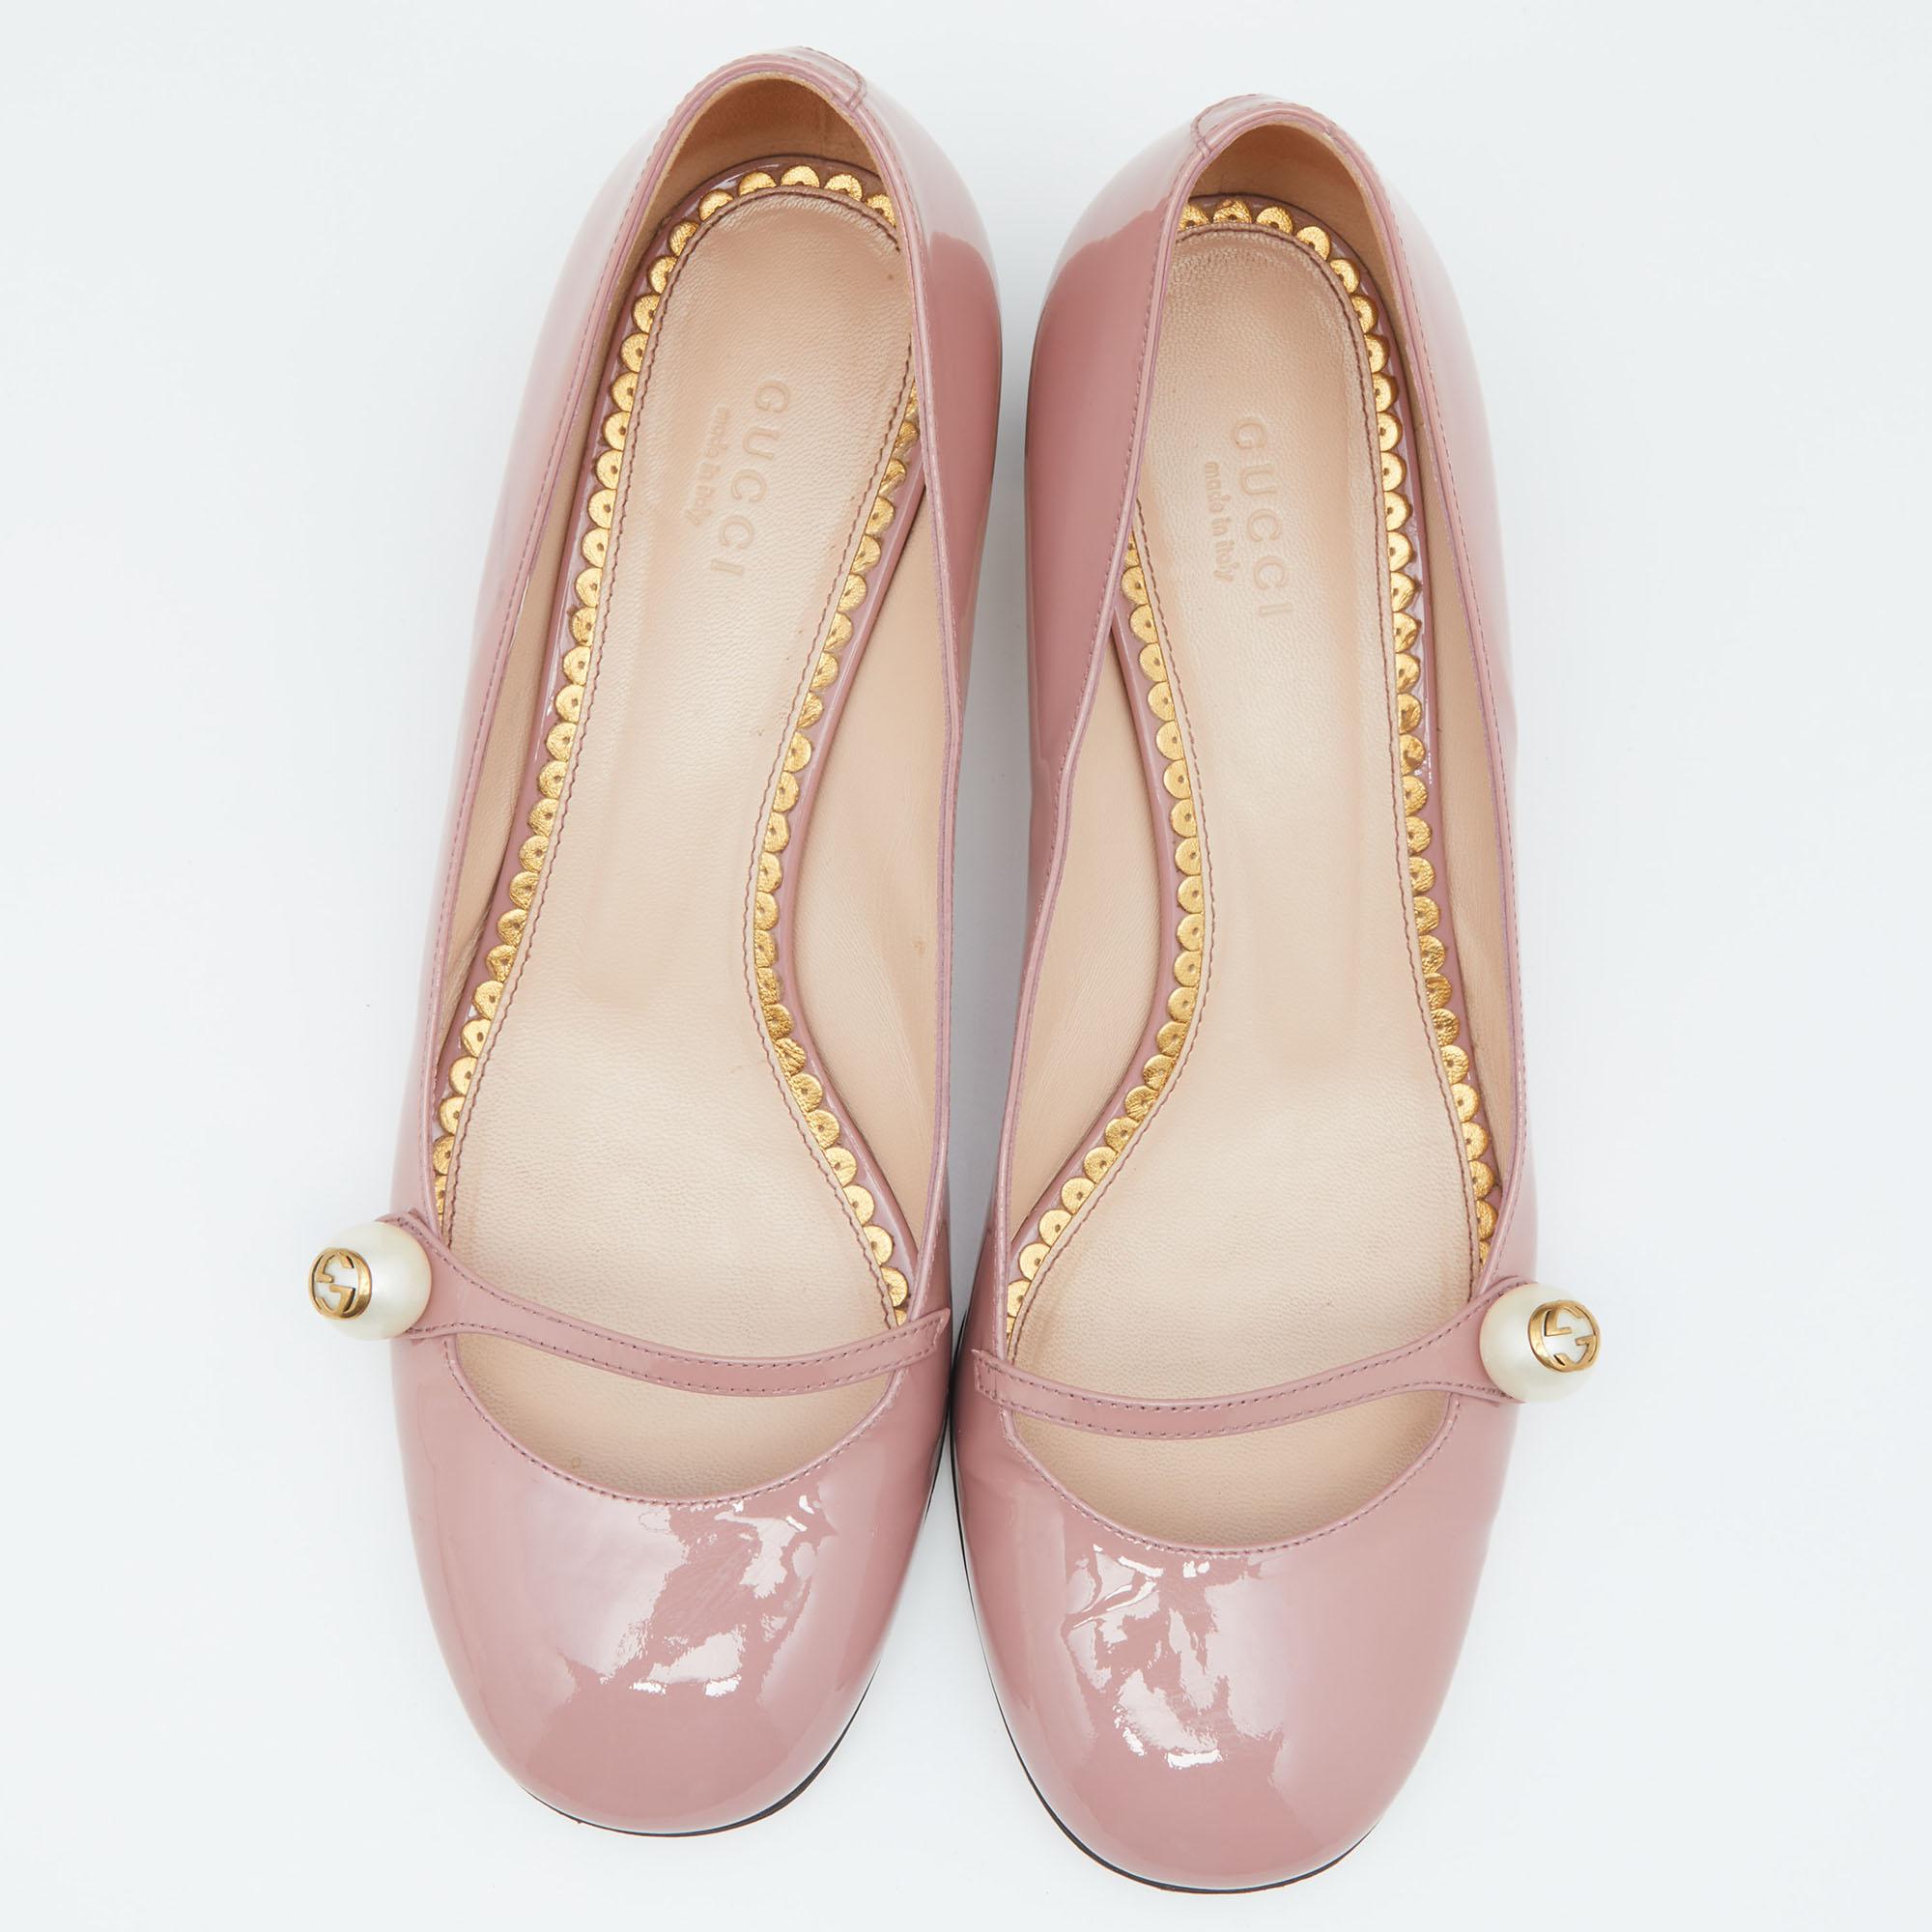 Made to stand out and make you the center of attraction, these Mary Jane pumps from Gucci are a must-buy! The pumps are crafted from patent leather and feature round toes. They flaunt a pearl detailed strap across the vamps, comfortable